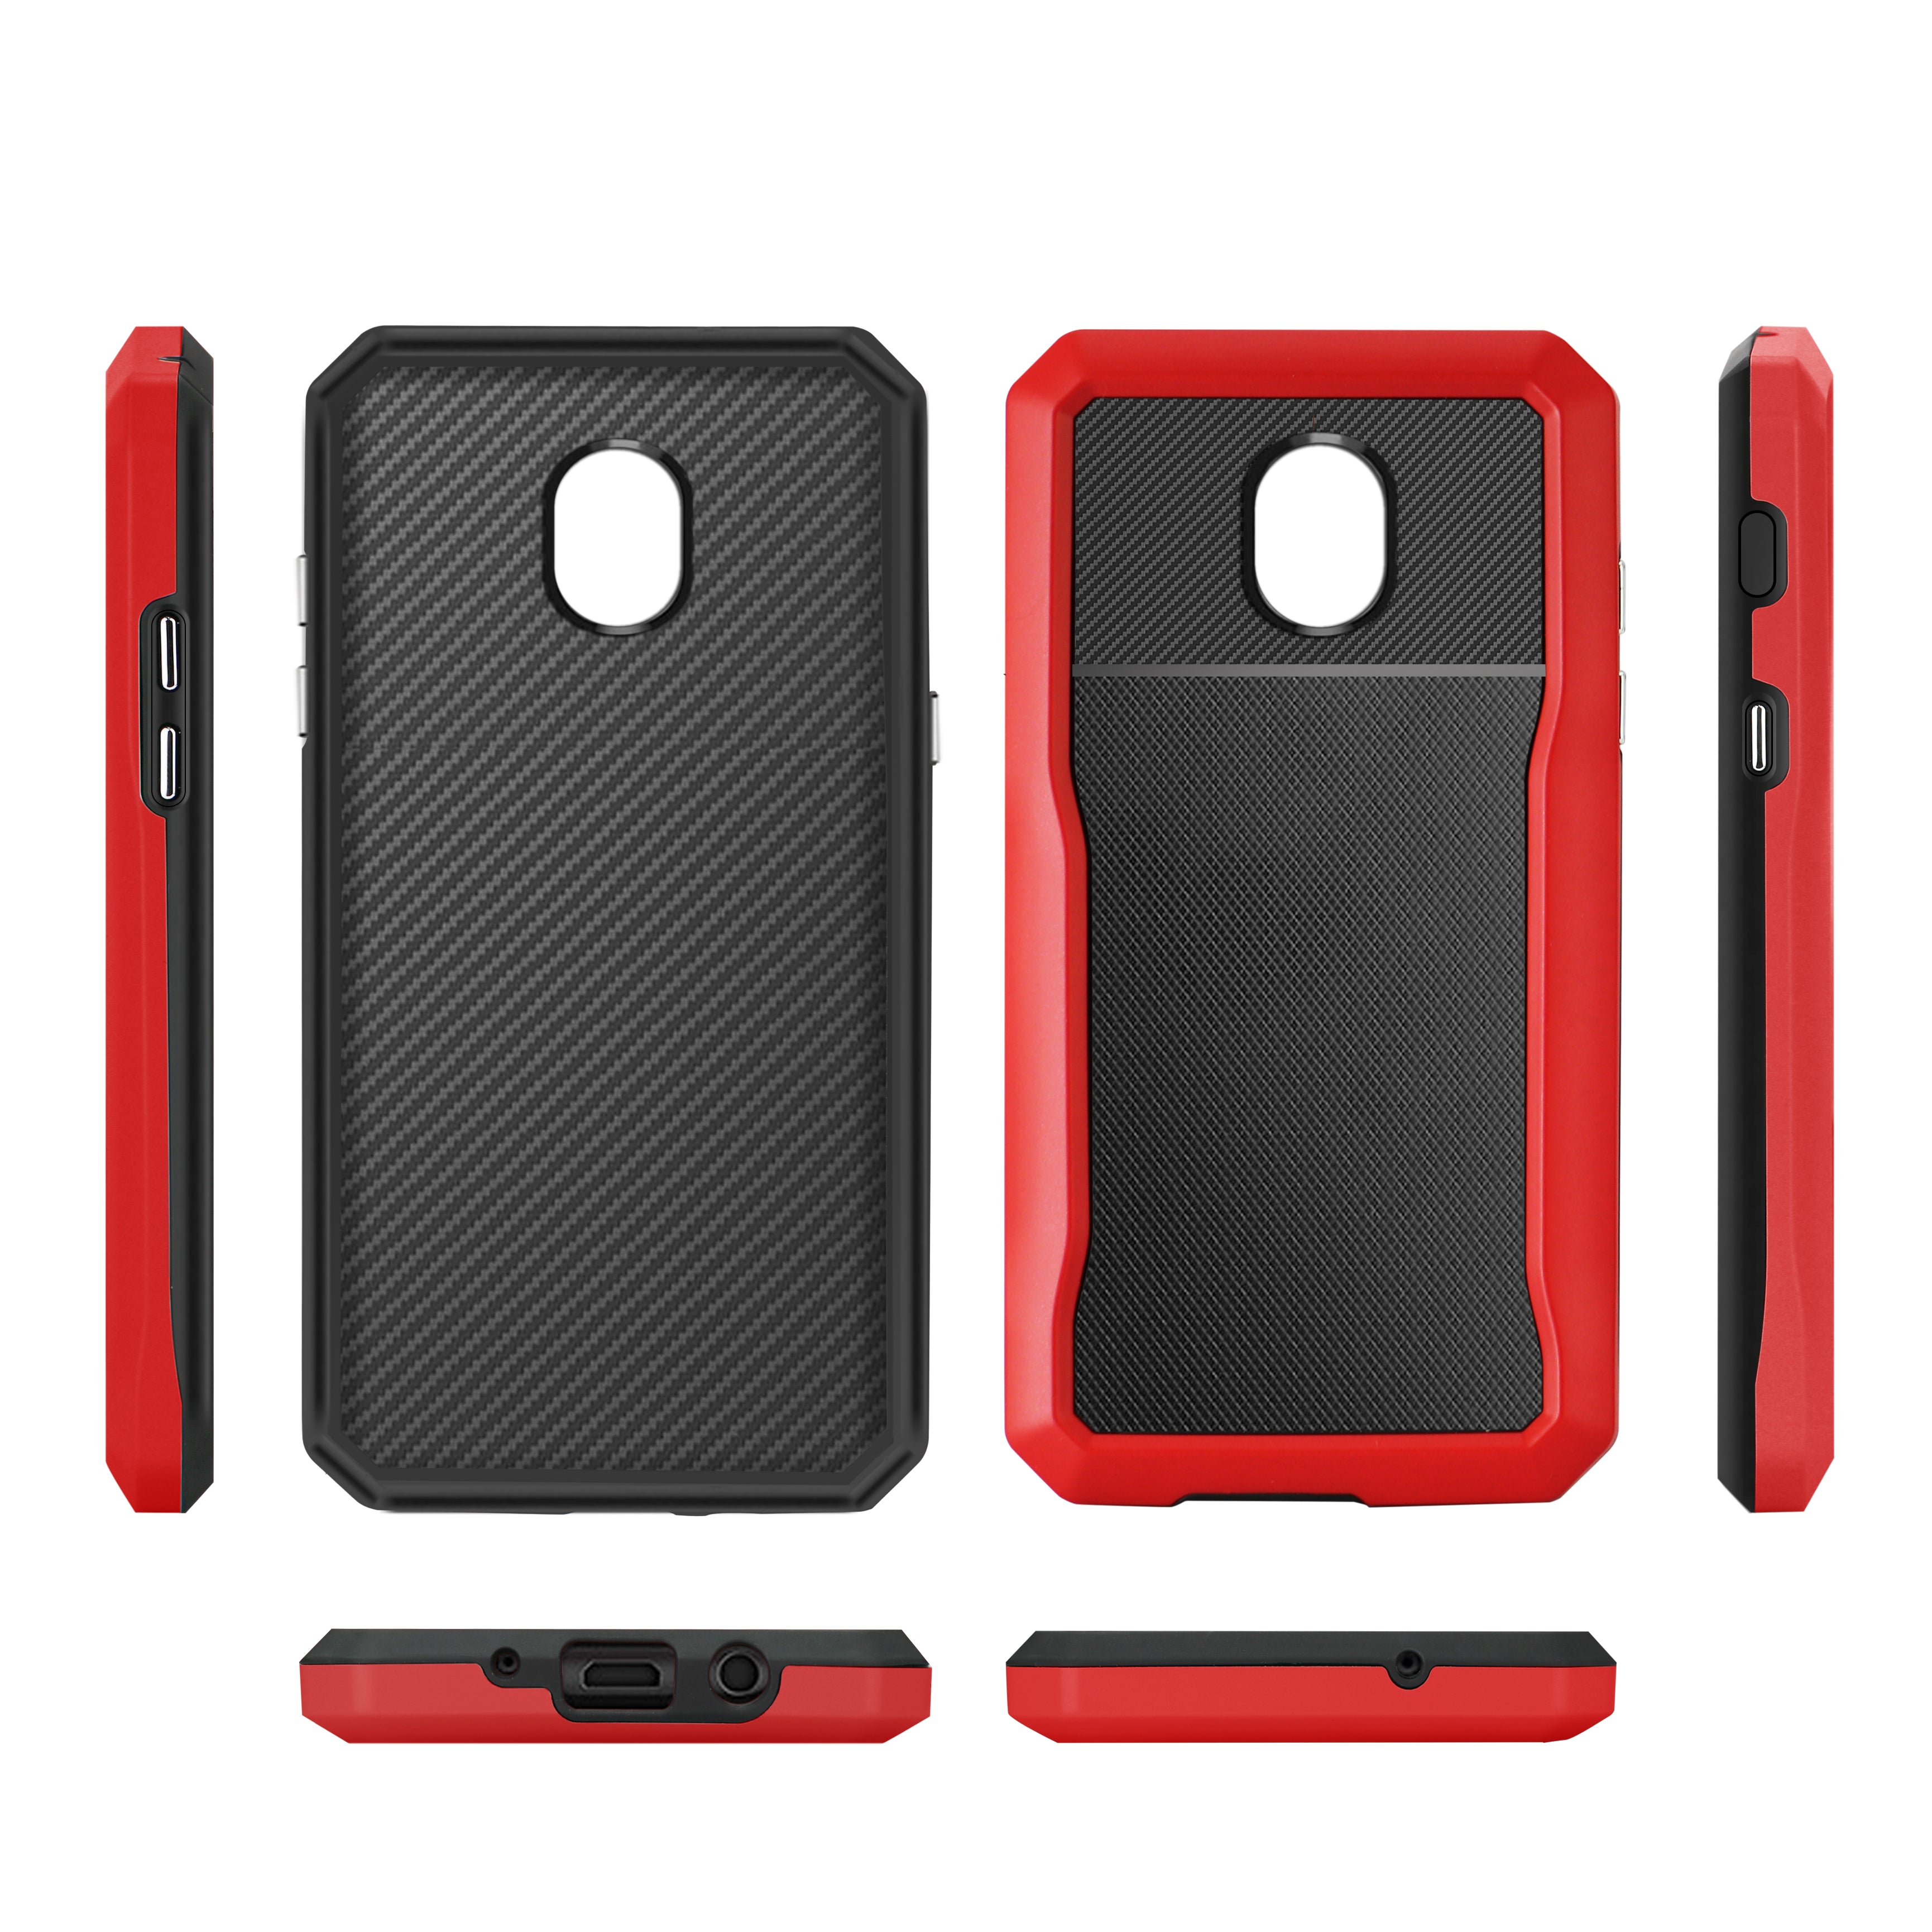 Reiko SAMSUNG GALAXY J3 (2018) Full Coverage Shockproof Case In Red